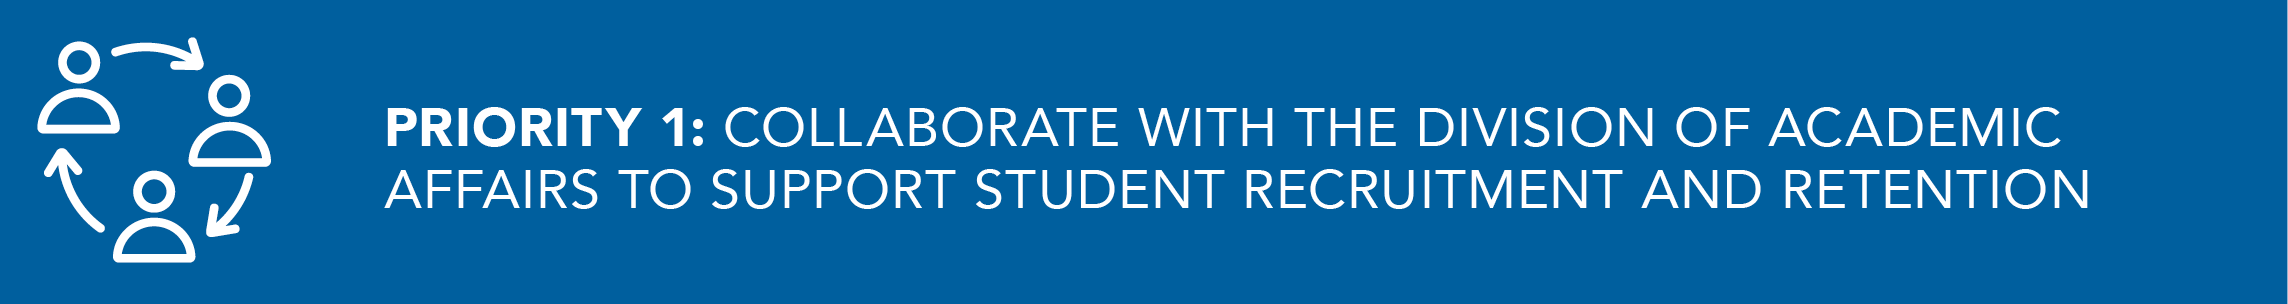 Priority 1: Collaborate with the Division of Academic Affairs to Support Student Recruitment and Retention